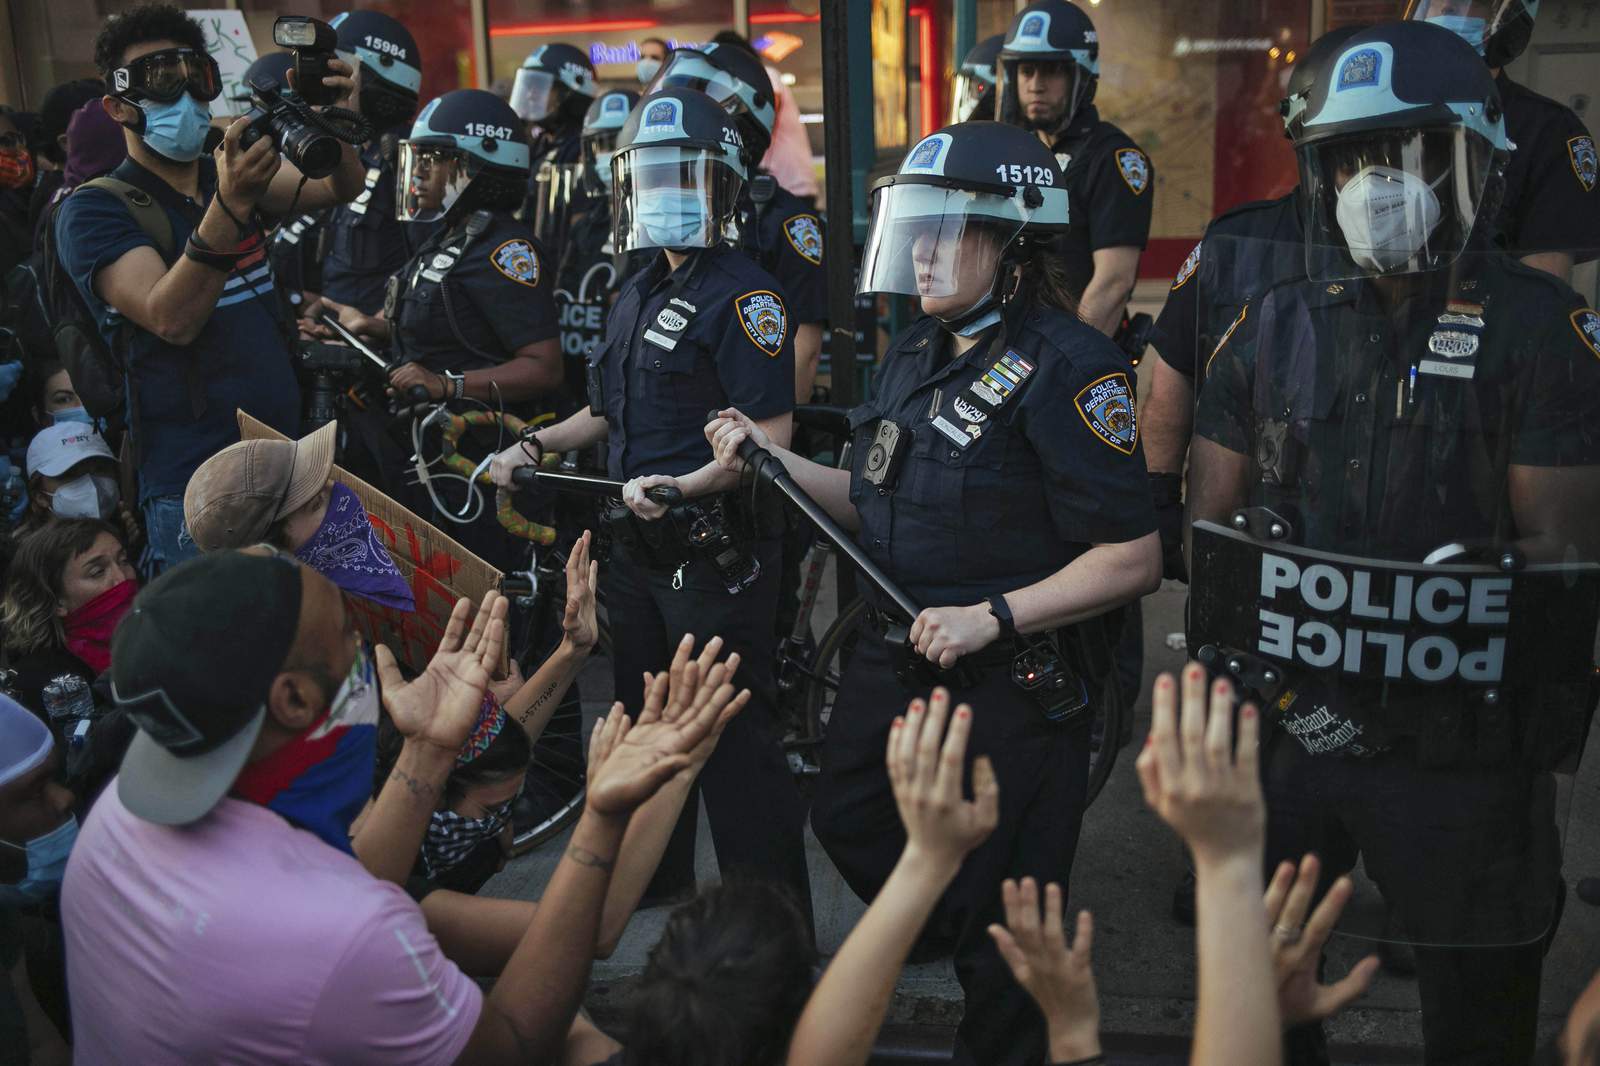 NY attorney general sues NYPD over Floyd protest response